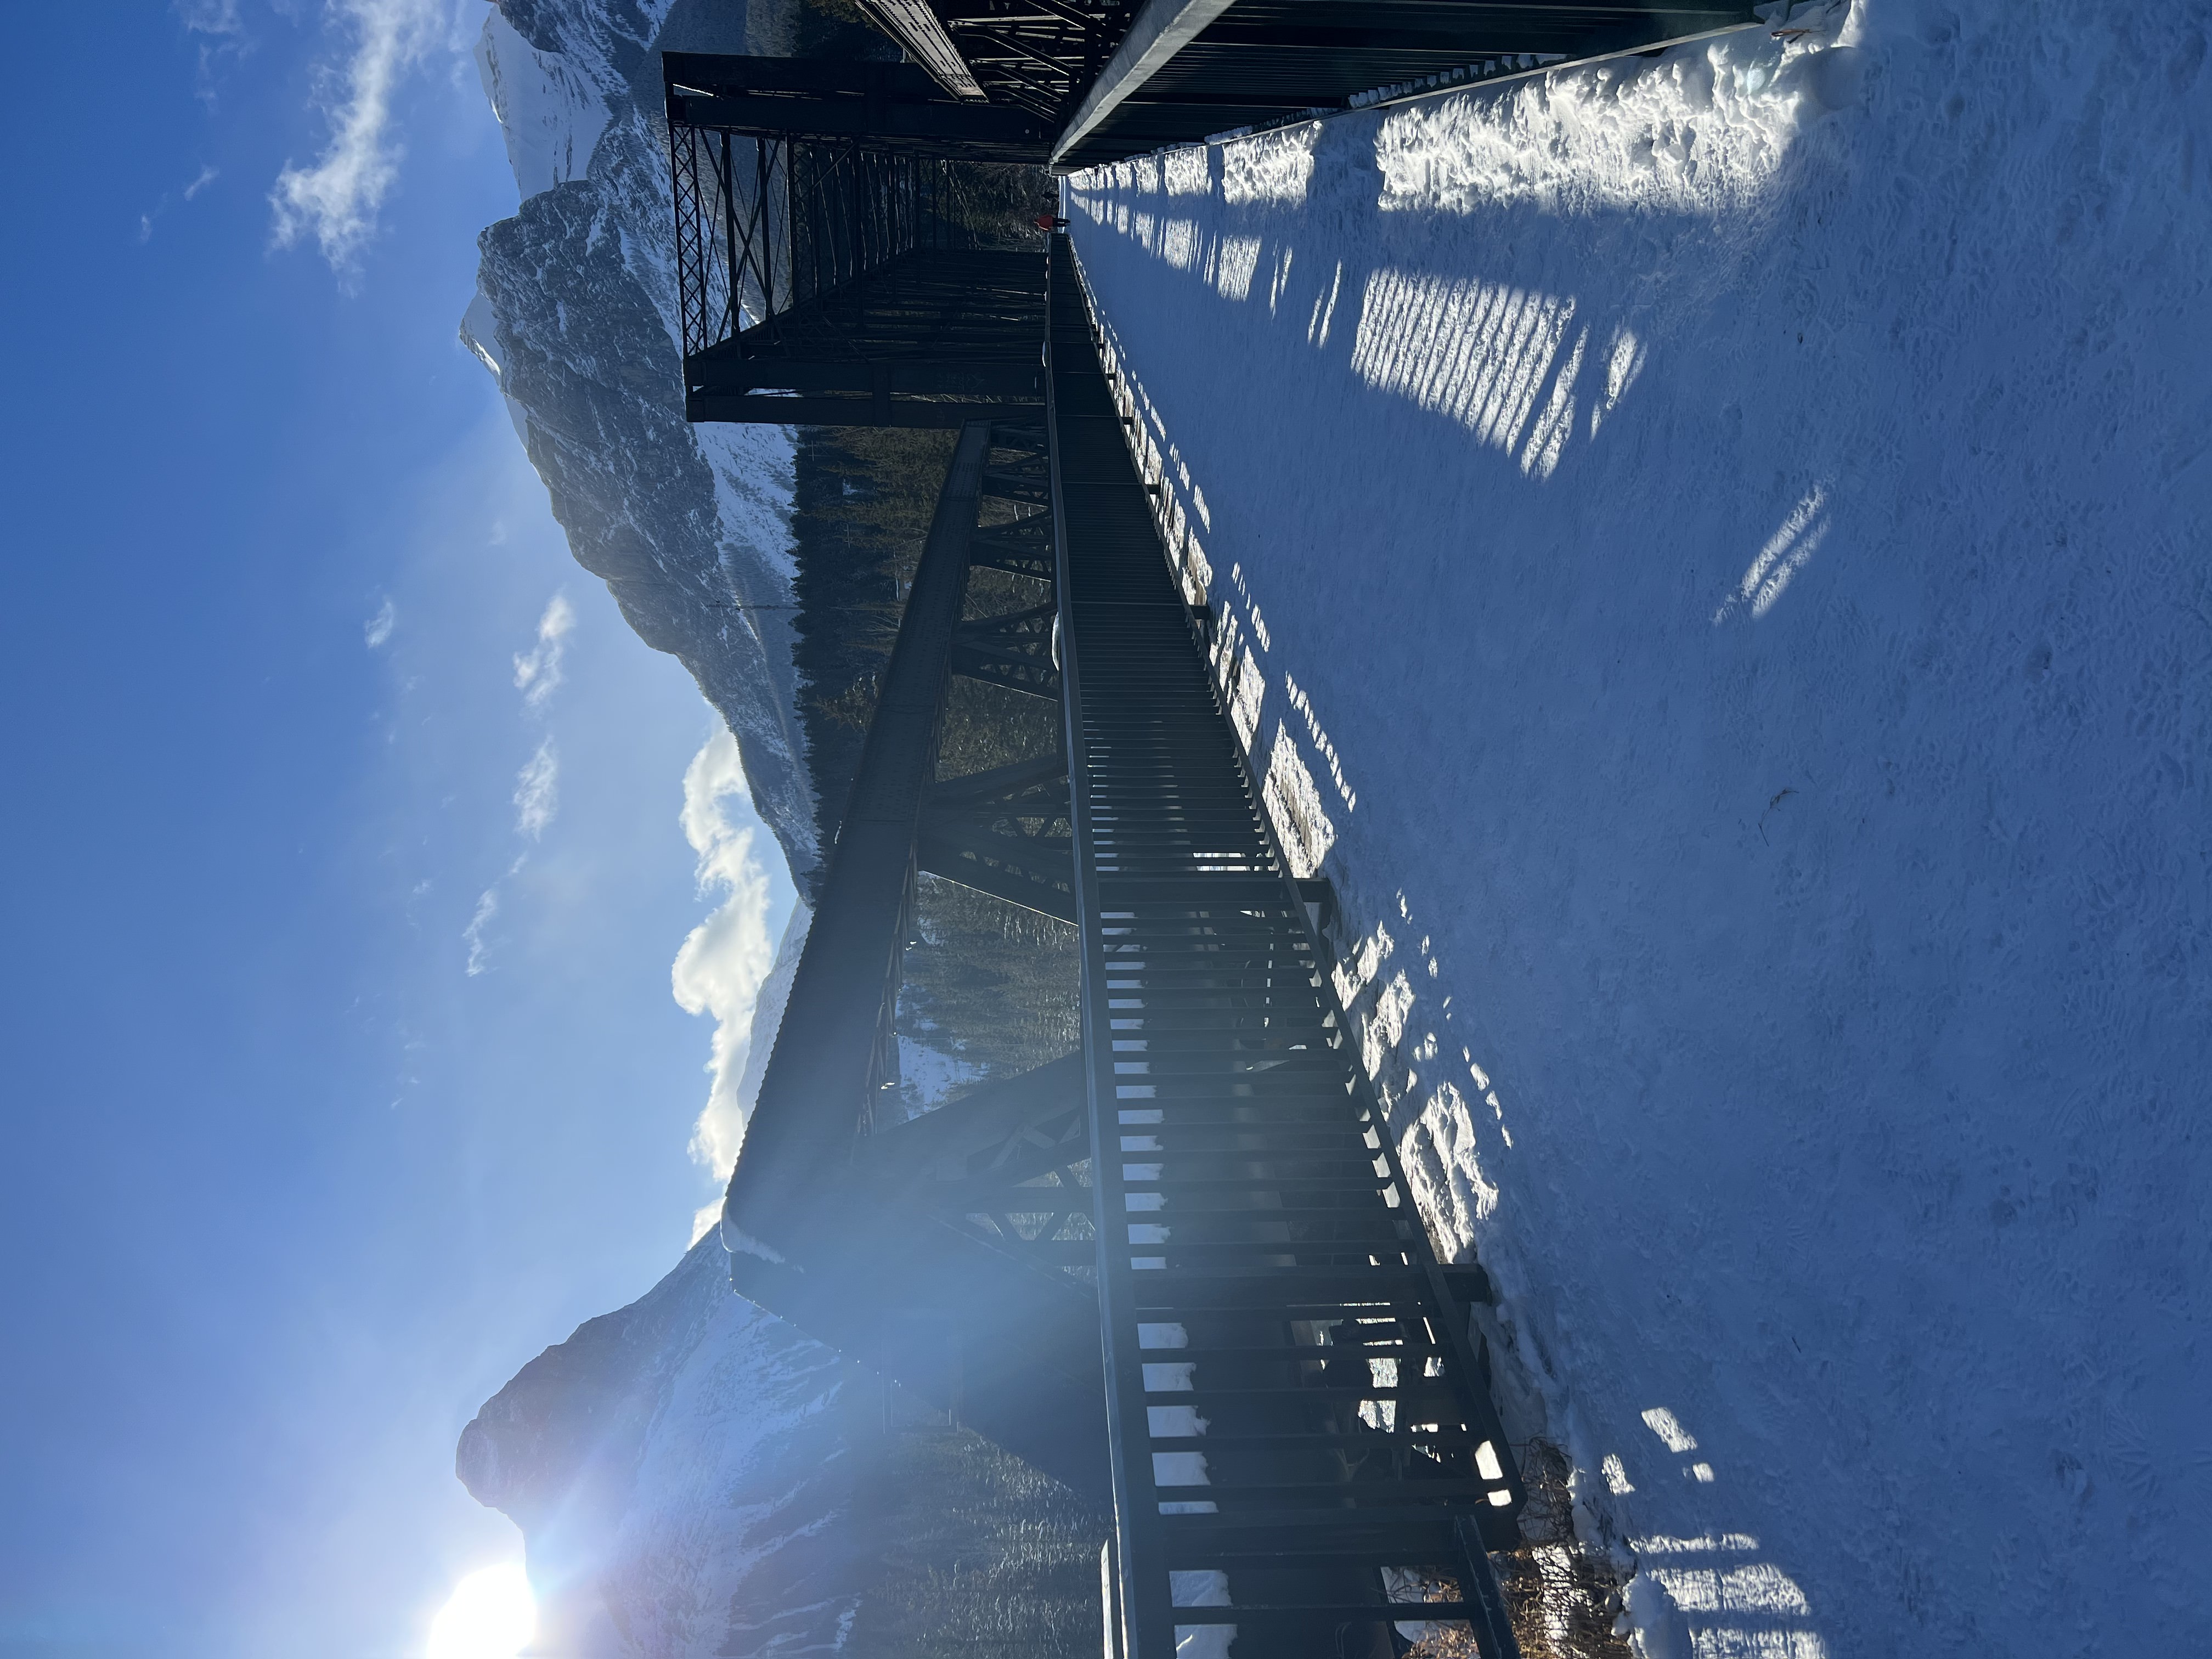 image of Canmore Engine Bridge in Canmore Alberta Canada. Filming Location for The Last of Us. Image taken from end of bridge with snow on ground, iron bridge either side of picture, mountains in background, blue sky and sun setting over far left mountain.